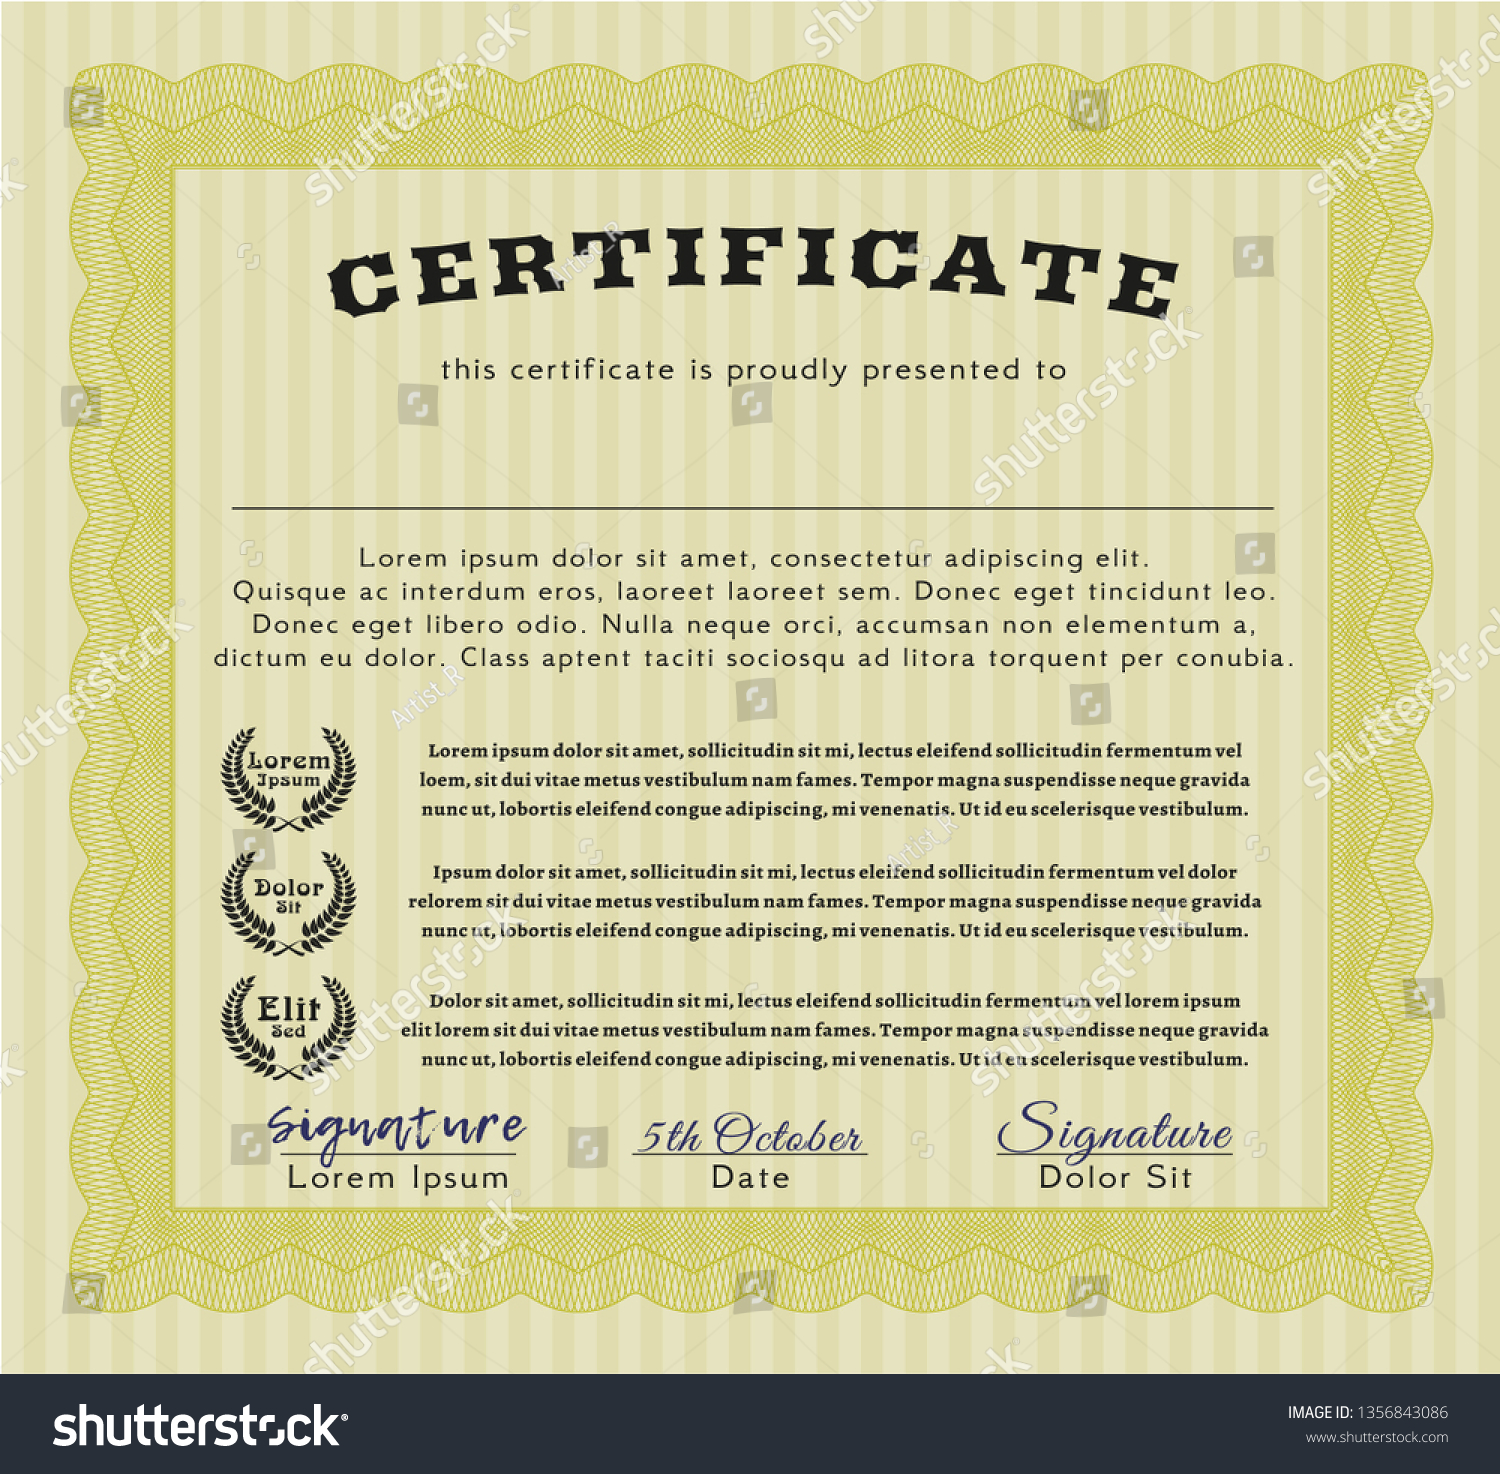 Yellow Diploma. Perfect design. With quality background. Vector illustration.  #1356843086